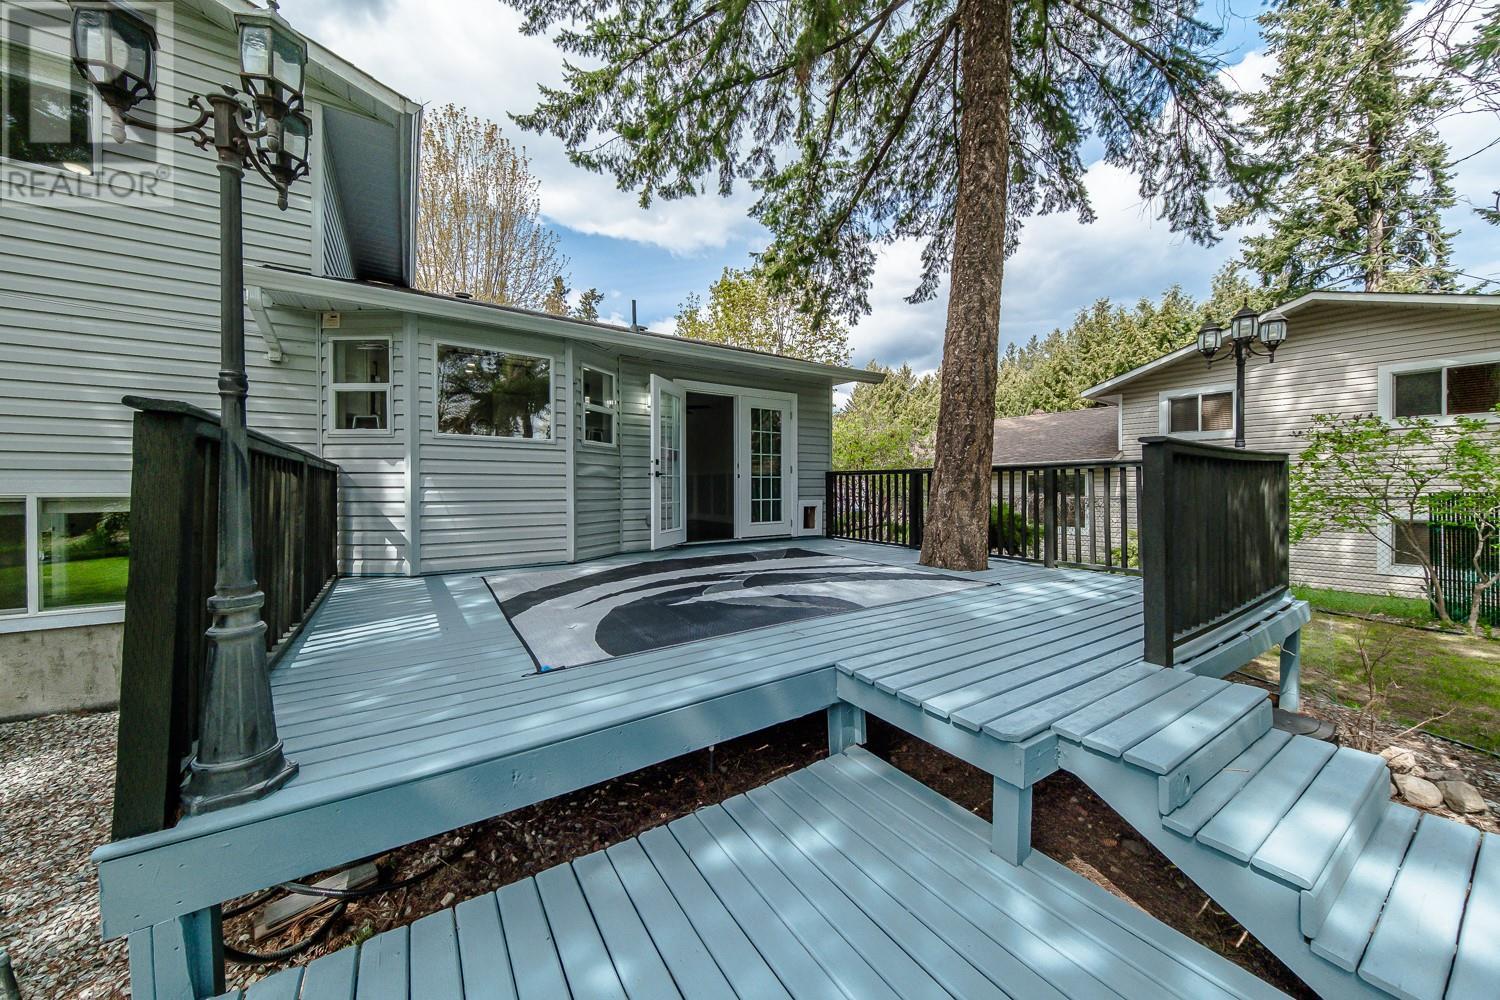  3549 Country Pines Other, West Kelowna